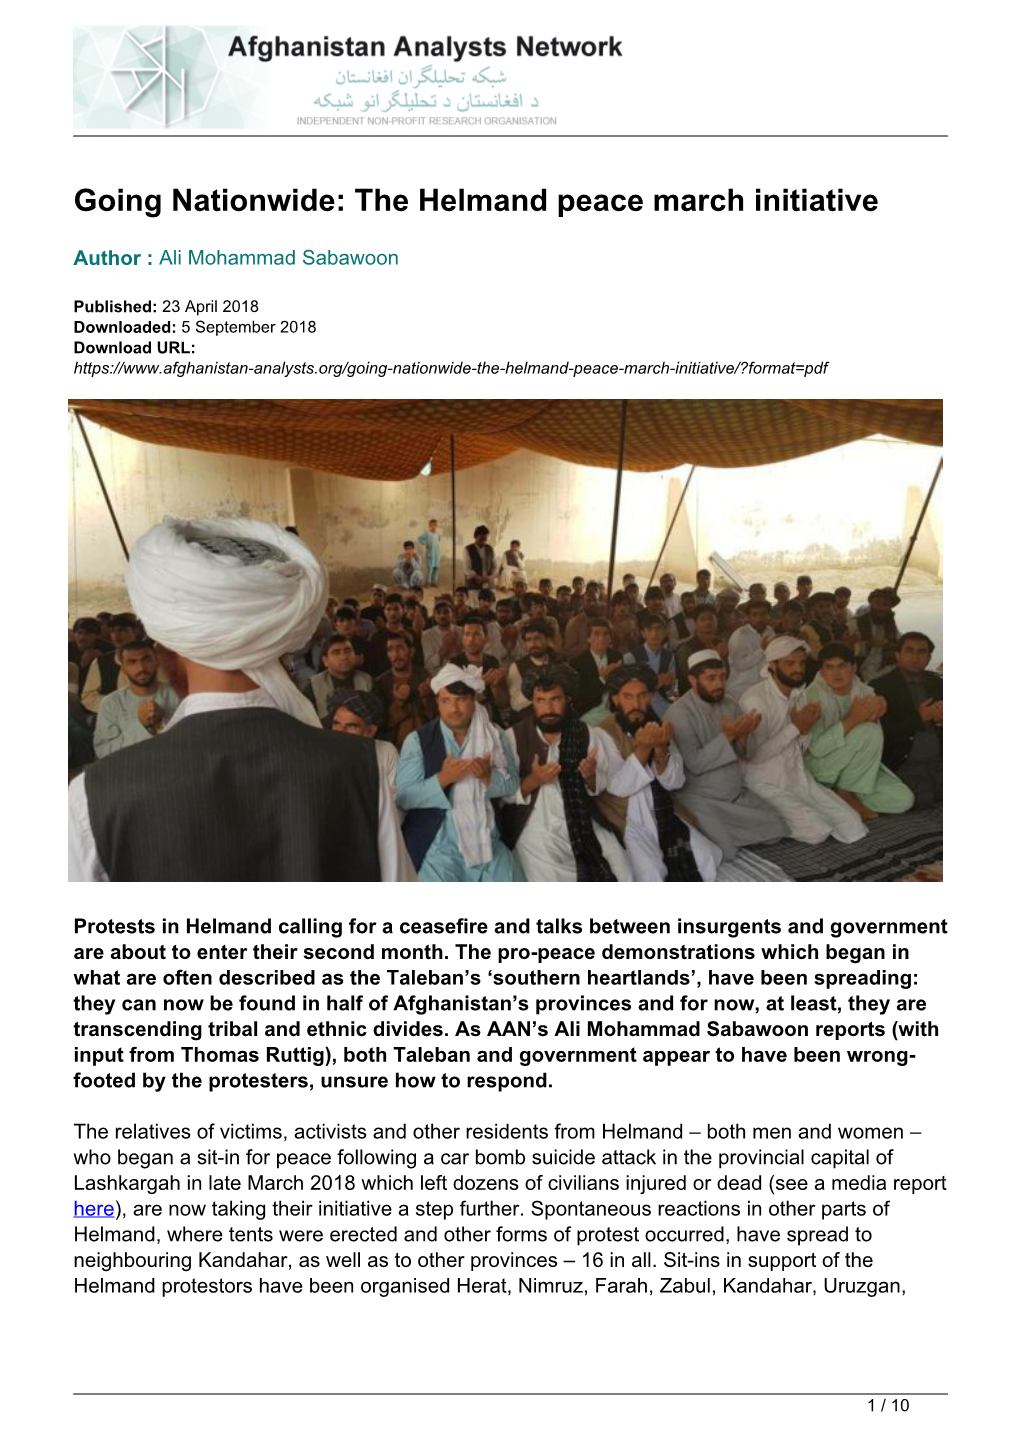 The Helmand Peace March Initiative